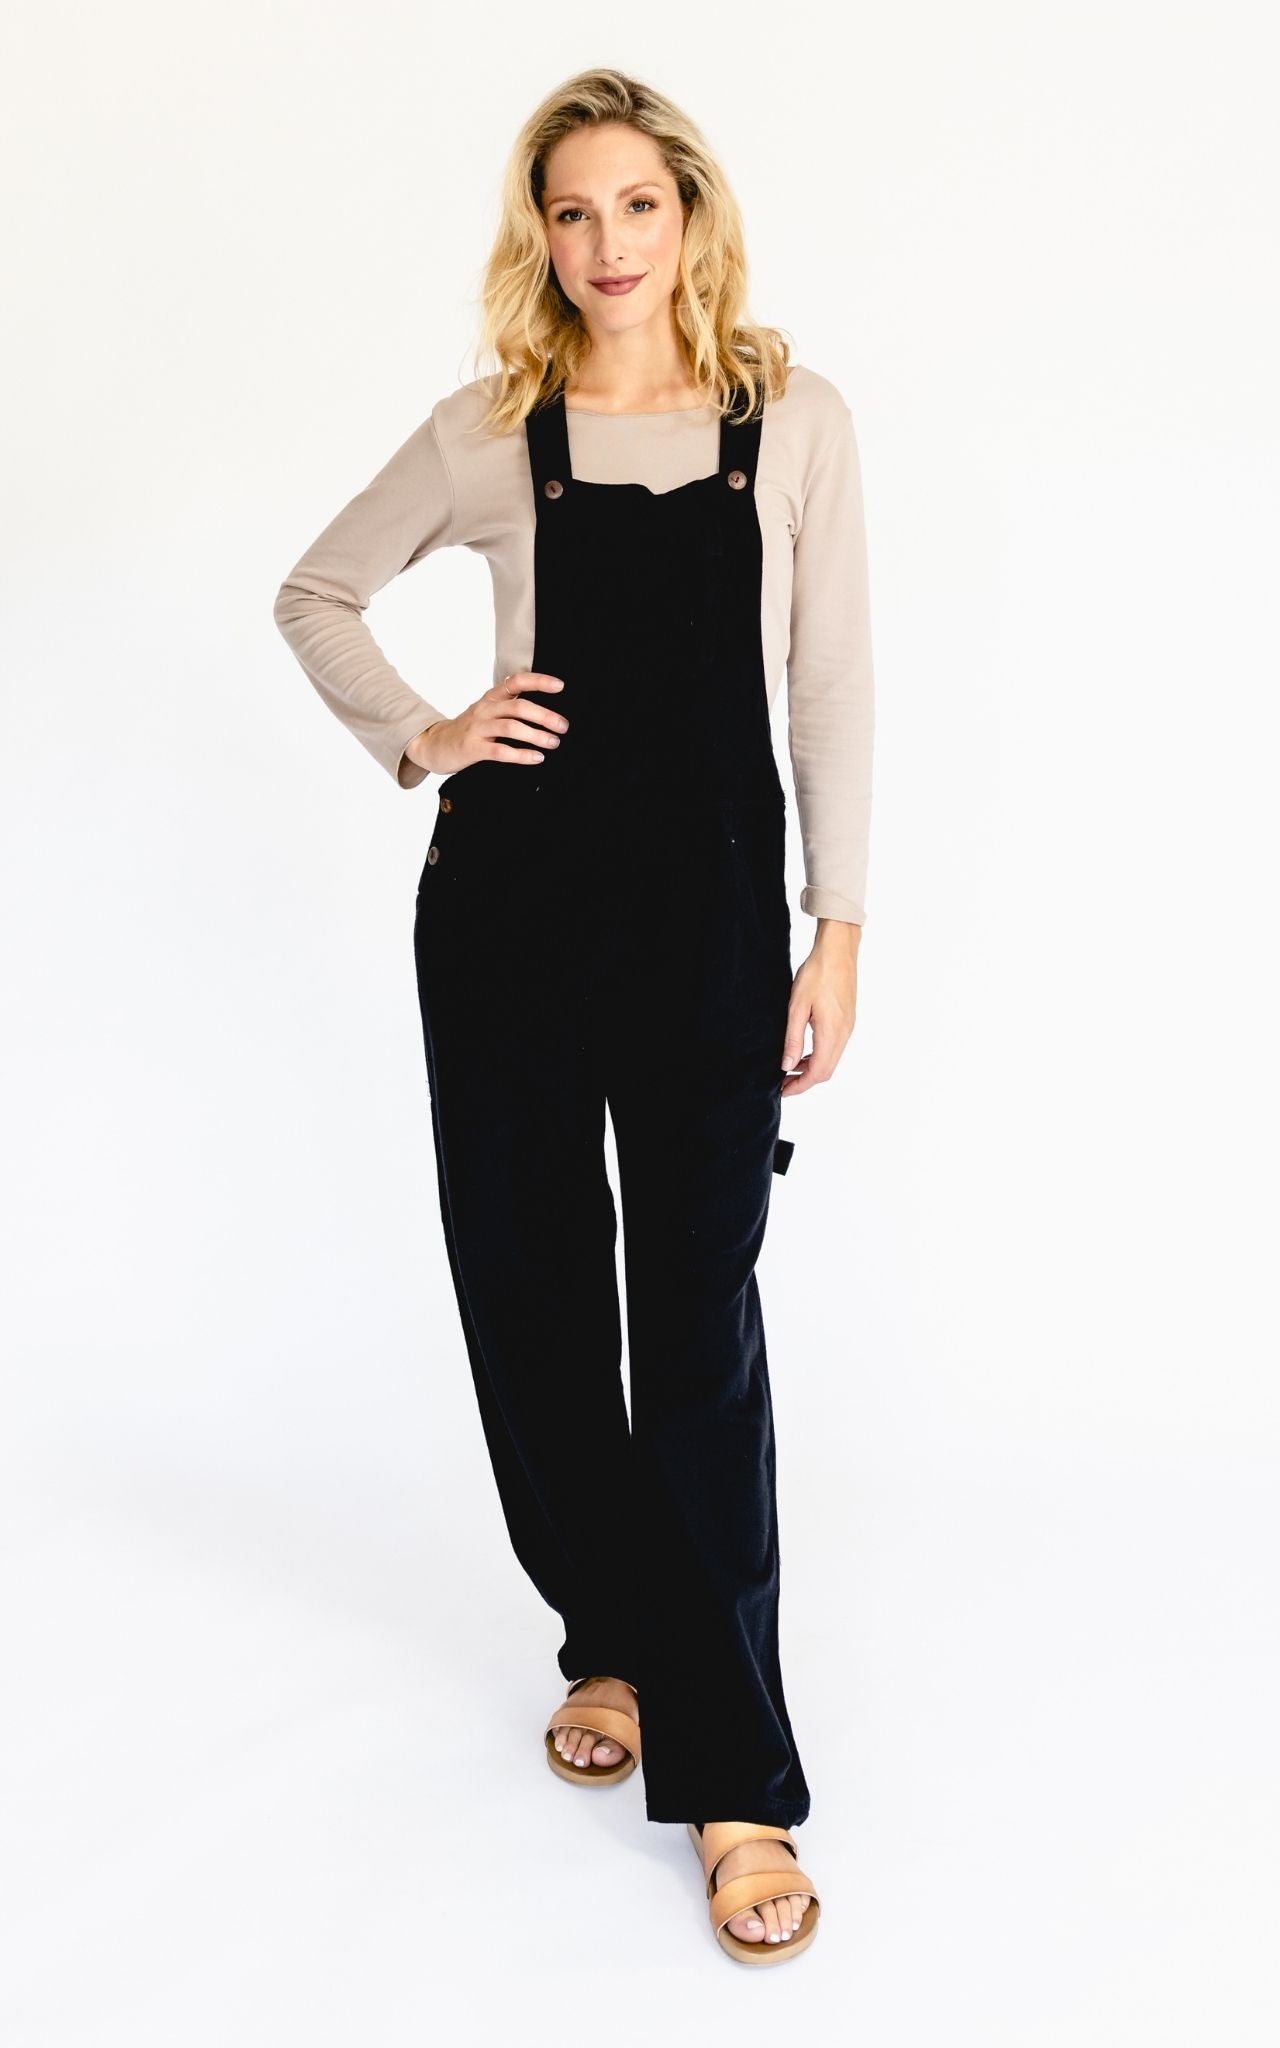 Surya Australia Ethical Classic Cotton Work Overalls from Nepal - Black